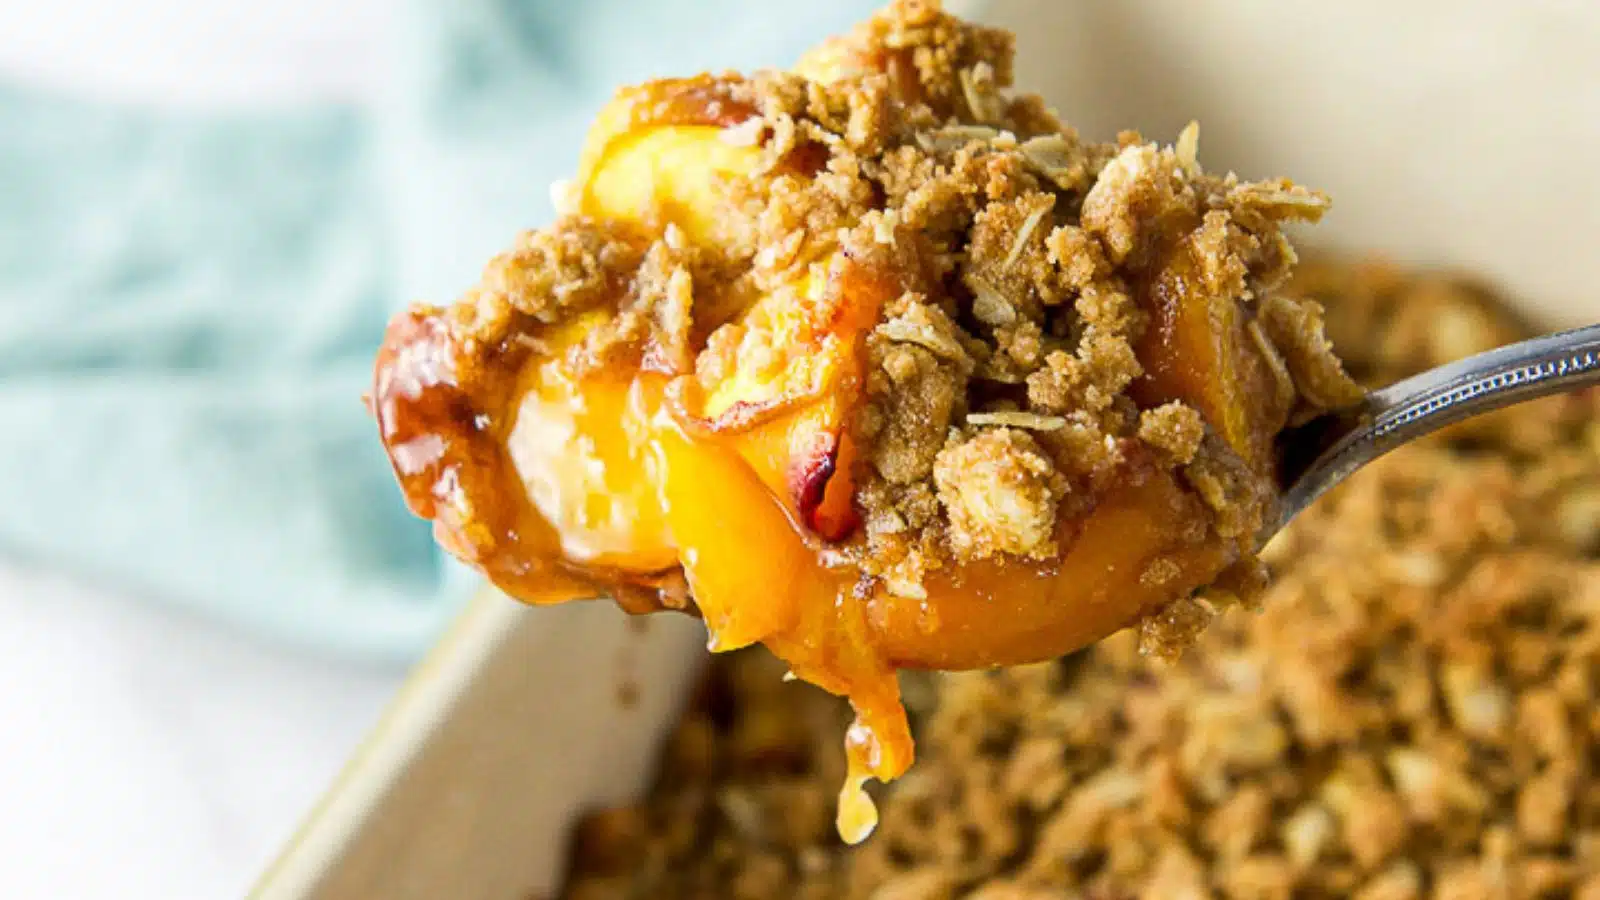 A spoon with peach crisp on it over the pan of crisp